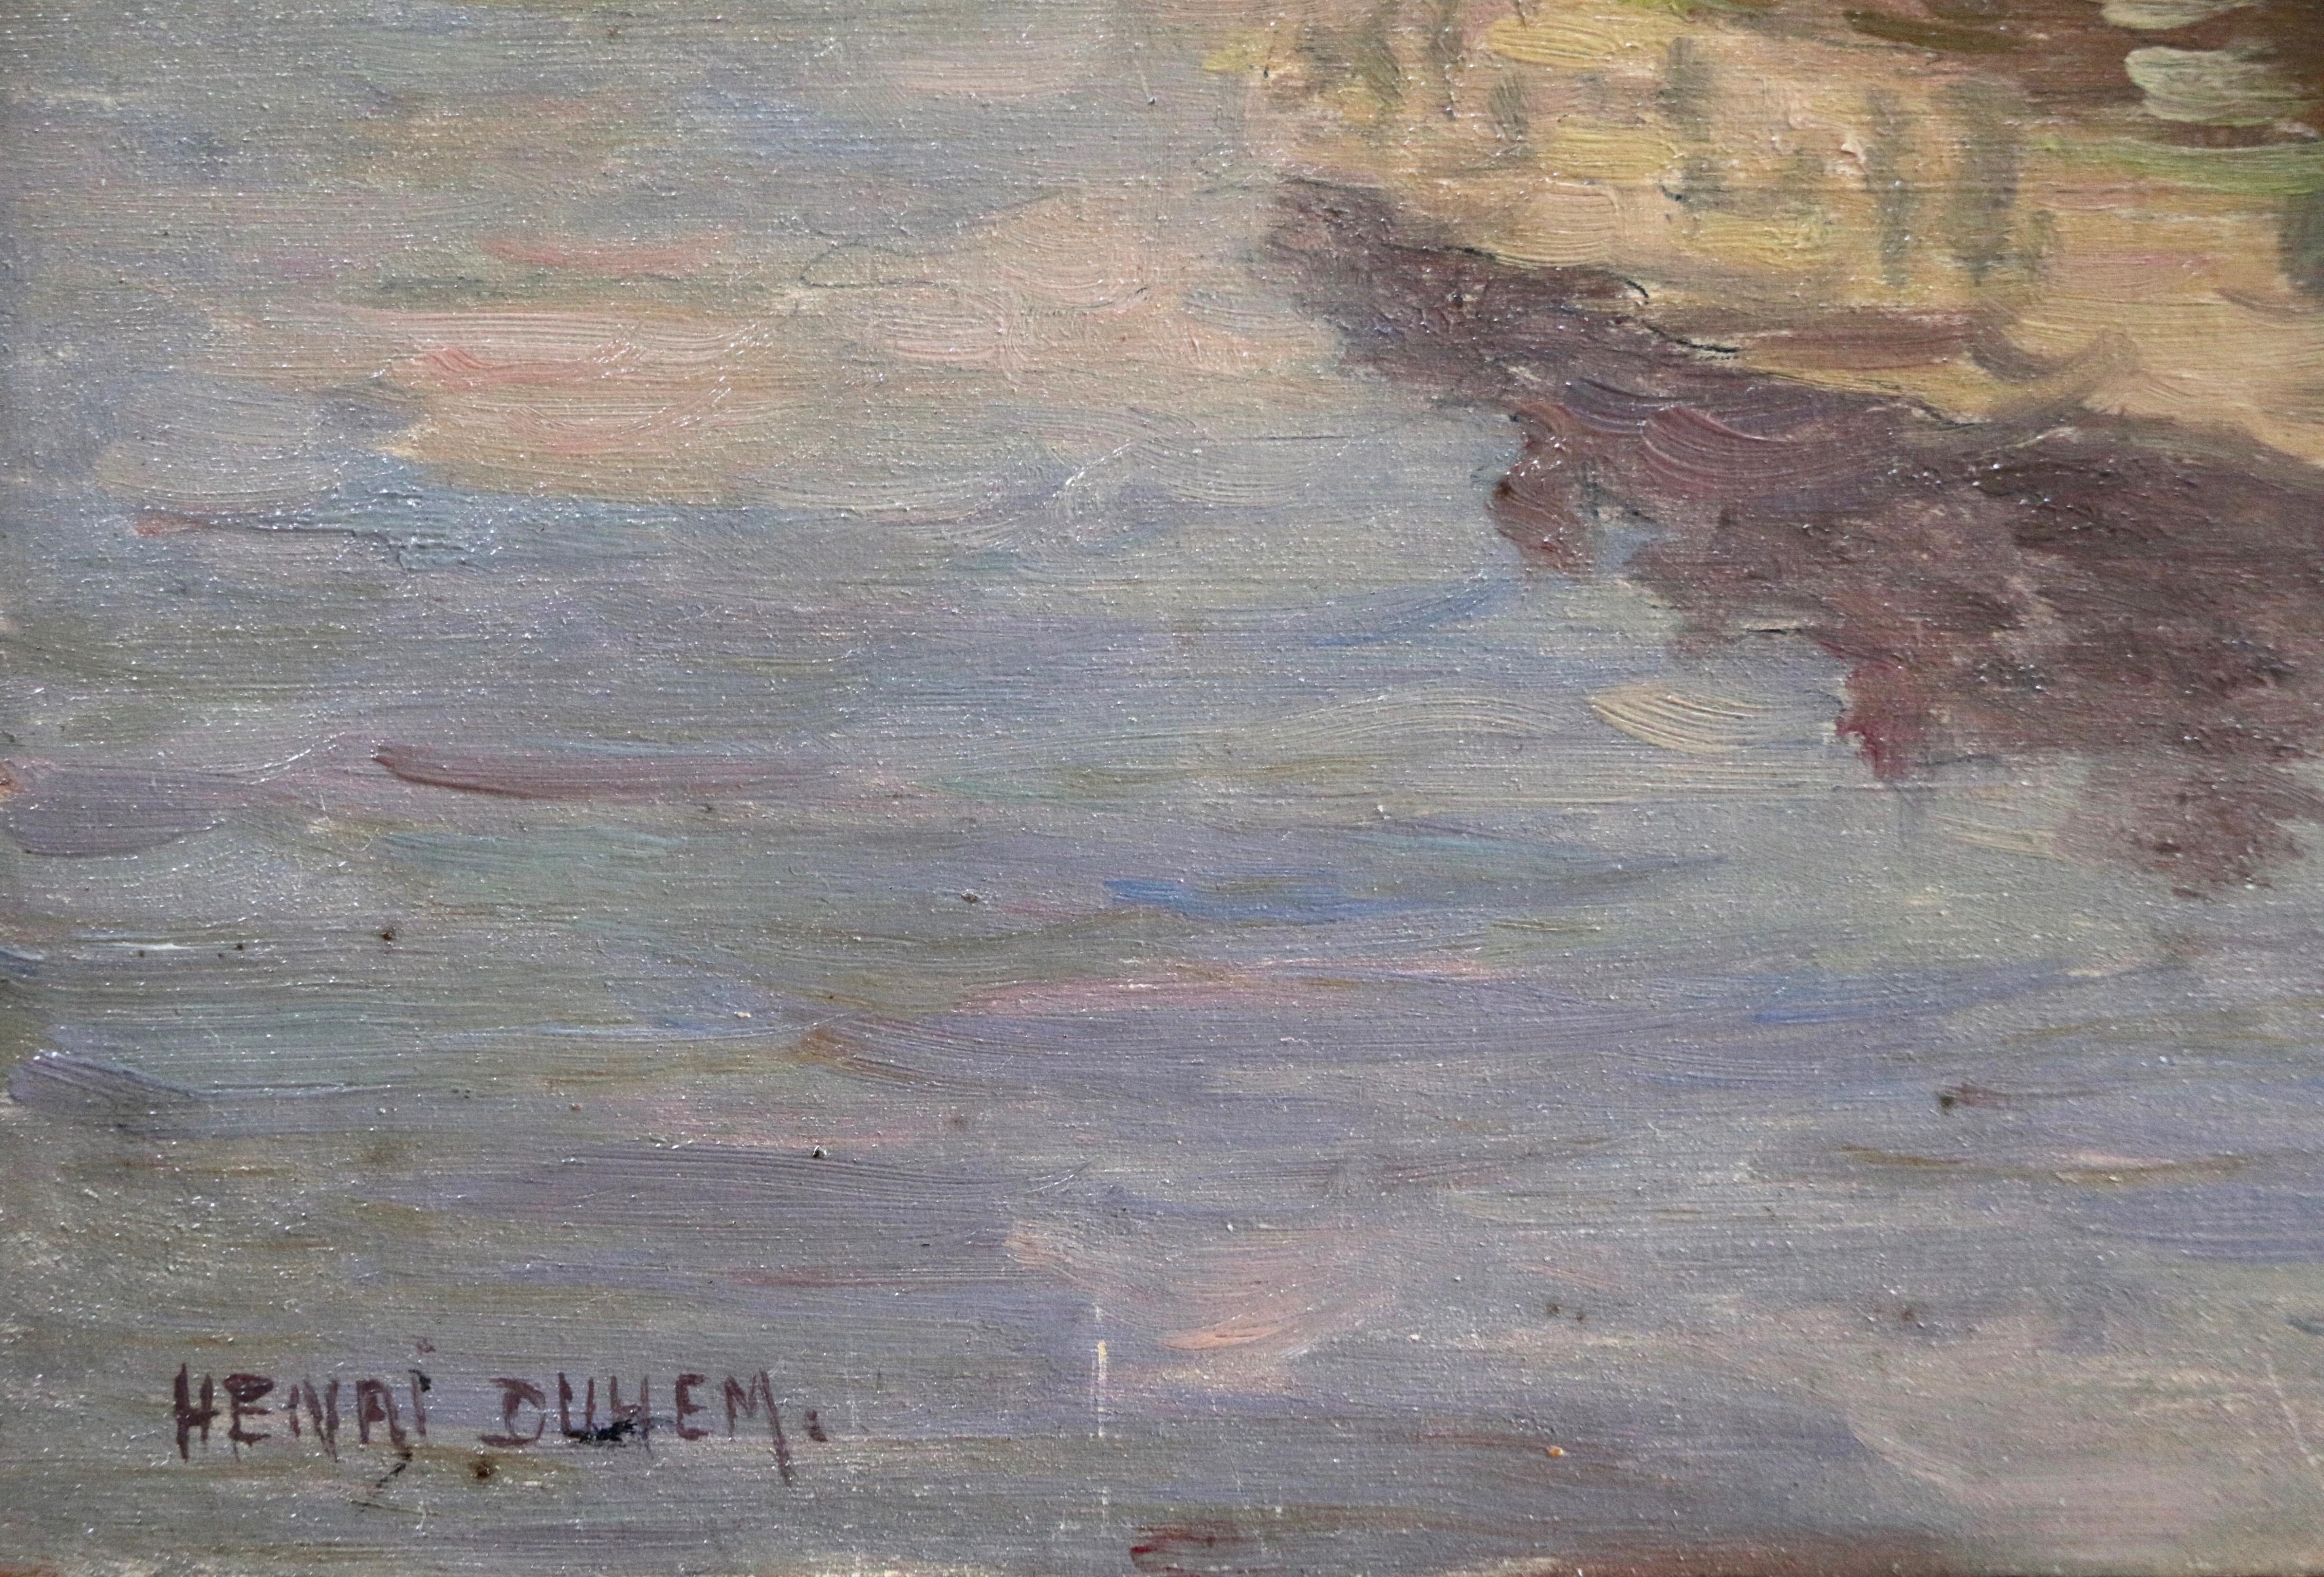 Oil on panel by Henri Duhem. Signed lower left and dated 1904 verso. This painting is not currently framed but a suitable frame can be sourced if required.

Descendant of an old Flemish family, Henri Duhem was born in Douai on April 7, 1860. He